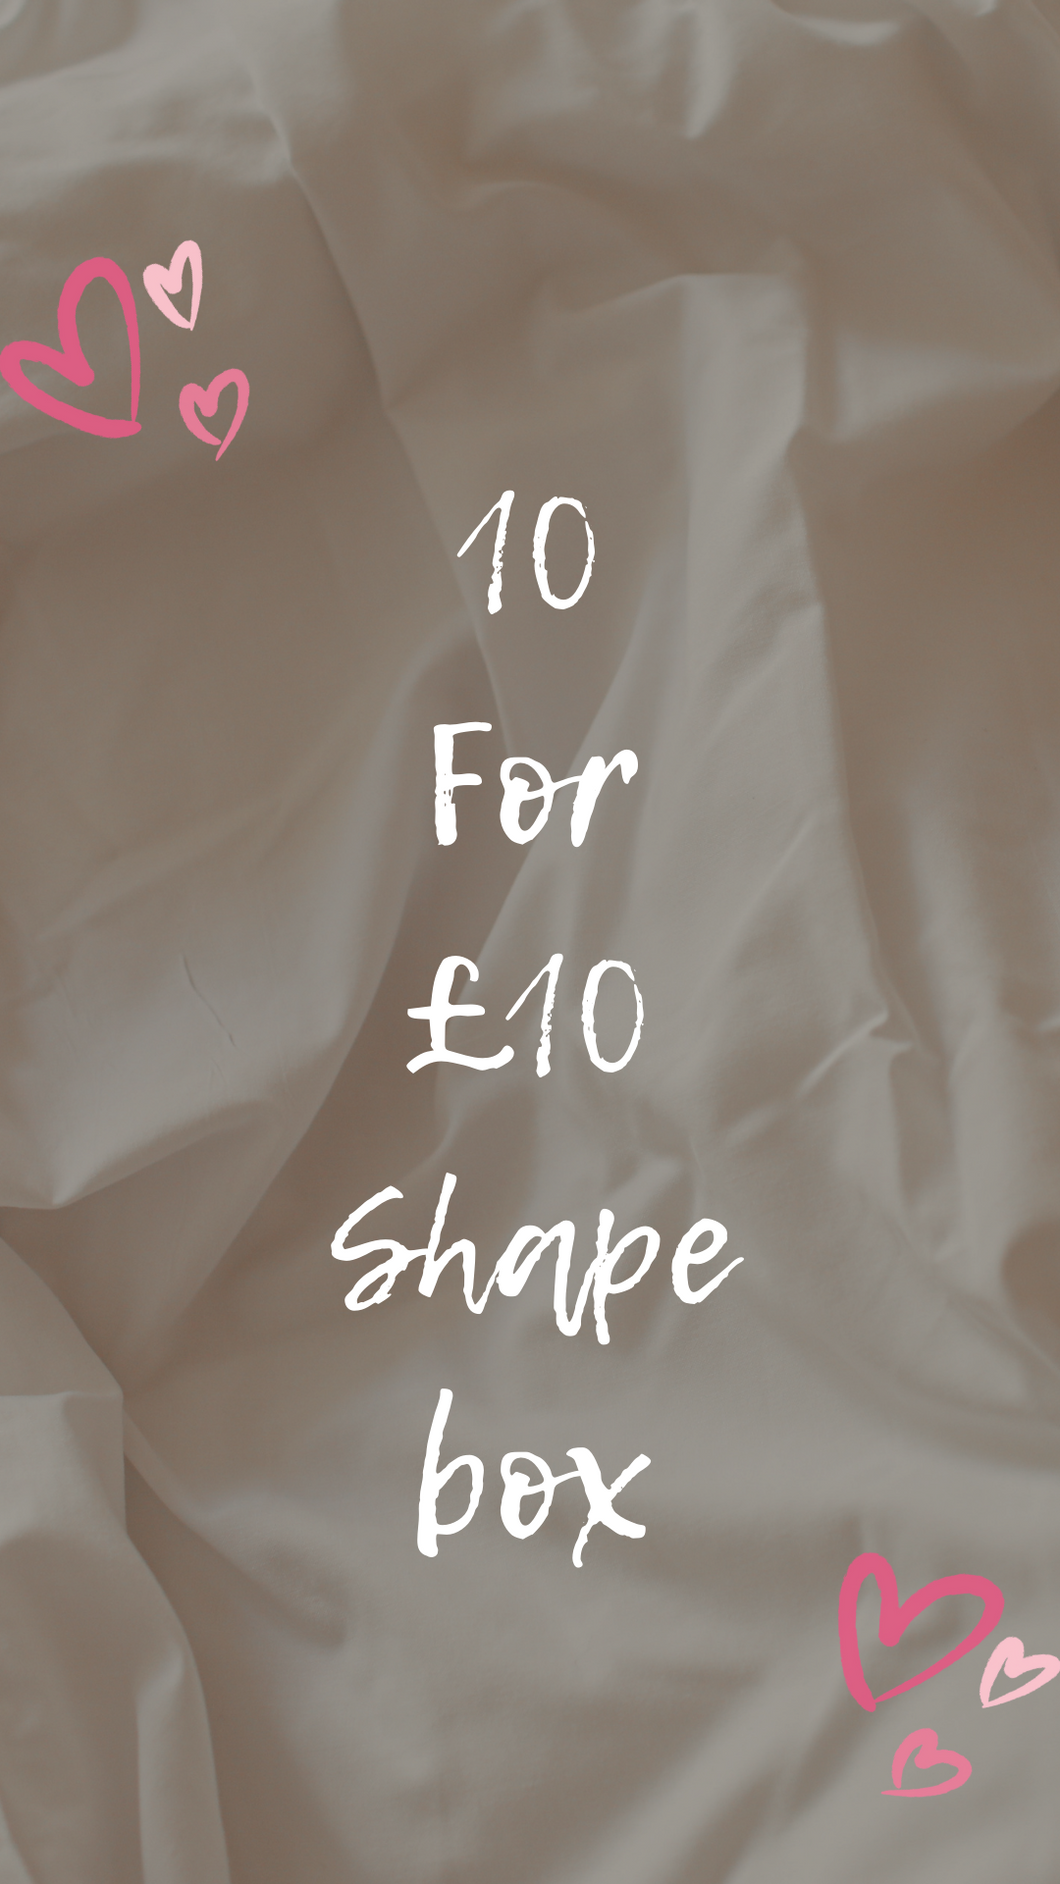 10 for £10